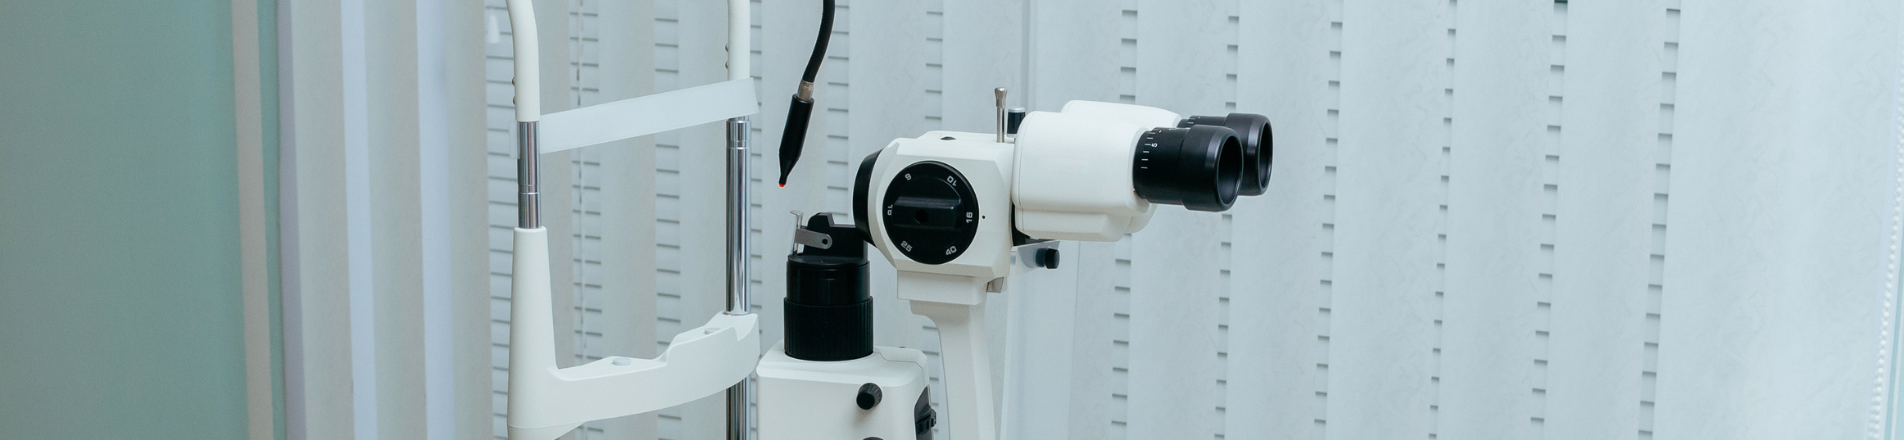 Image of a slit lamp